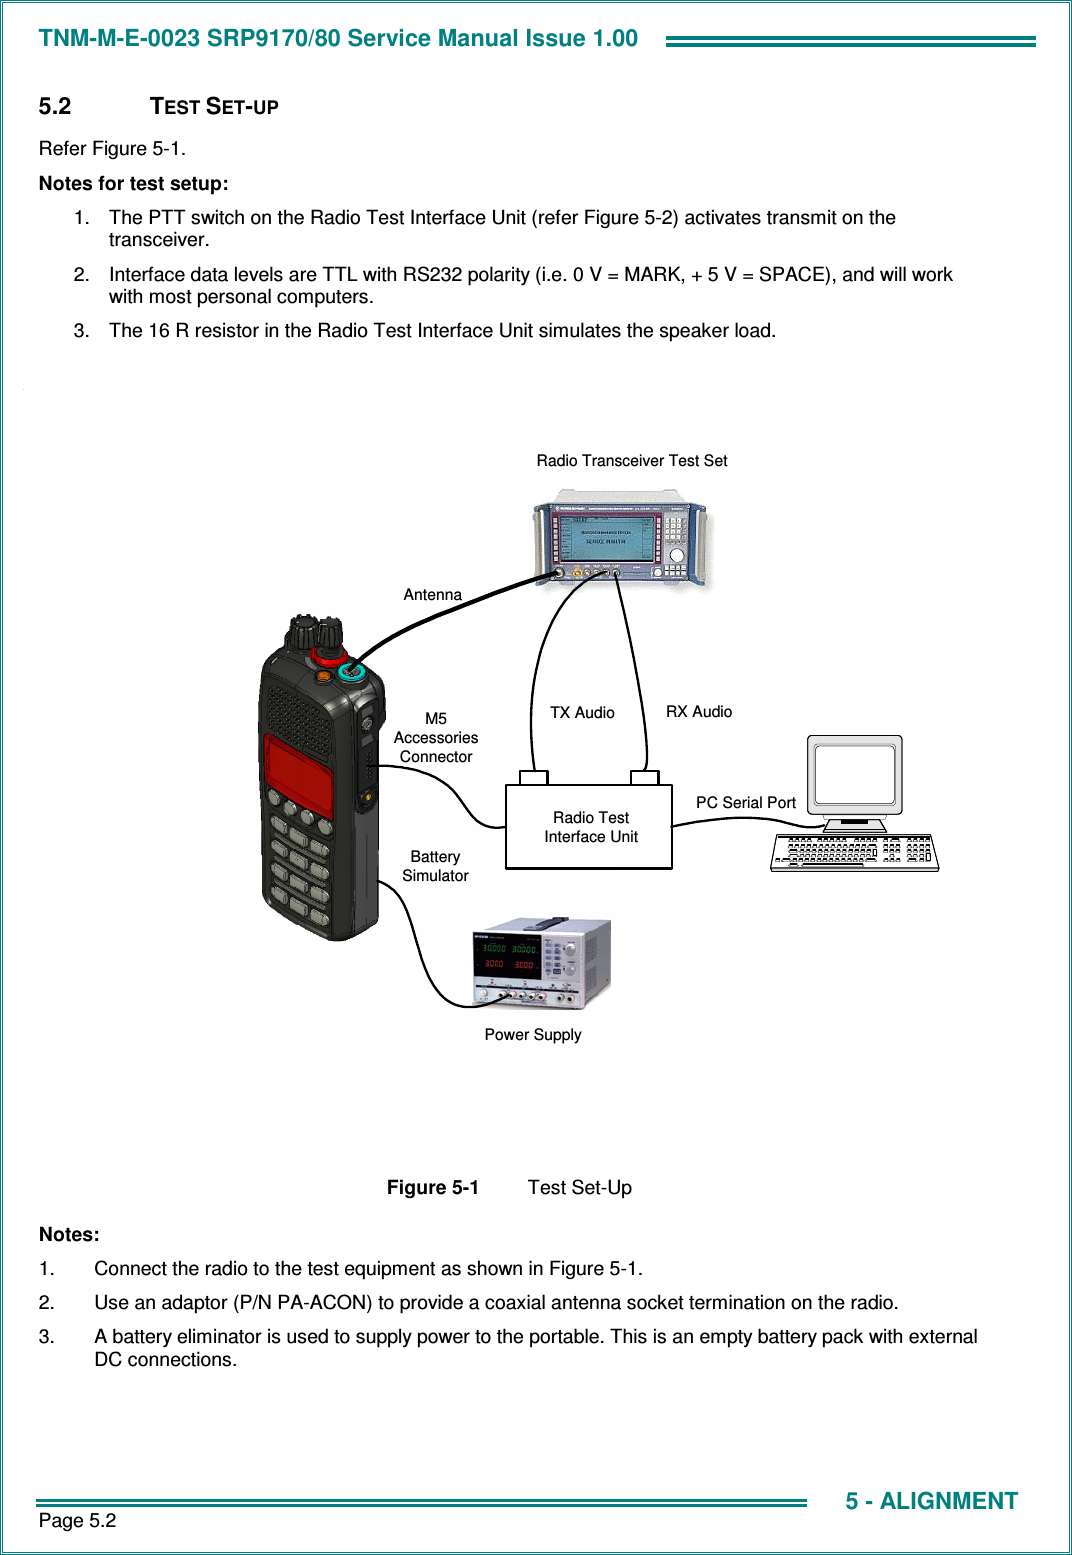 TNM-M-E-0023 SRP9170/80 Service Manual Issue 1.00 Page 5.2 5 - ALIGNMENT5.2  TEST SET-UP Refer Figure 5-1. Notes for test setup: 1.  The PTT switch on the Radio Test Interface Unit (refer Figure 5-2) activates transmit on the transceiver. 2.  Interface data levels are TTL with RS232 polarity (i.e. 0 V = MARK, + 5 V = SPACE), and will work with most personal computers. 3.  The 16 R resistor in the Radio Test Interface Unit simulates the speaker load.  Radio Transceiver Test SetPC Serial PortRX AudioTX AudioAntennaM5AccessoriesConnectorPower SupplyRadio TestInterface Unit`BatterySimulator Figure 5-1  Test Set-Up Notes: 1.  Connect the radio to the test equipment as shown in Figure 5-1. 2.  Use an adaptor (P/N PA-ACON) to provide a coaxial antenna socket termination on the radio. 3.  A battery eliminator is used to supply power to the portable. This is an empty battery pack with external DC connections.   